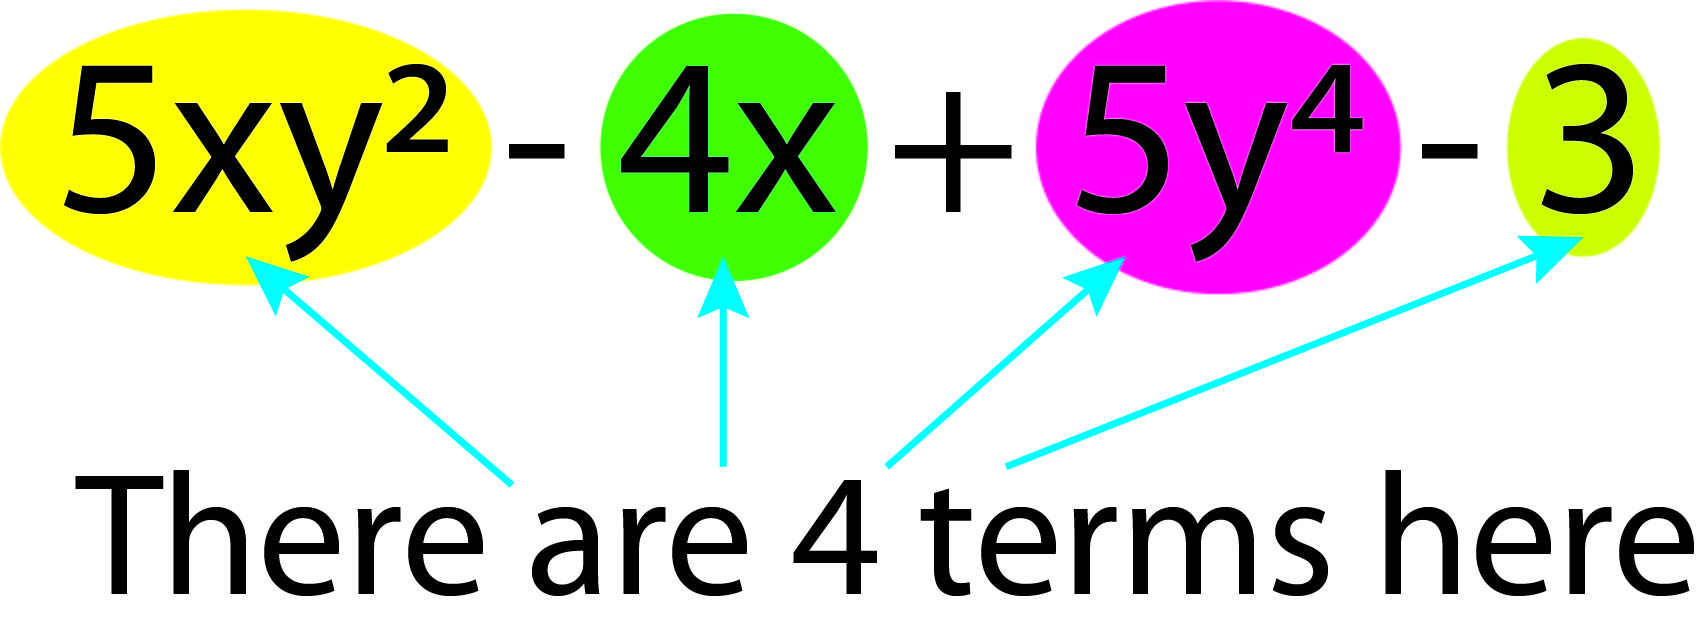 5xy-4x+5y-3 in this equation there are 4 terms